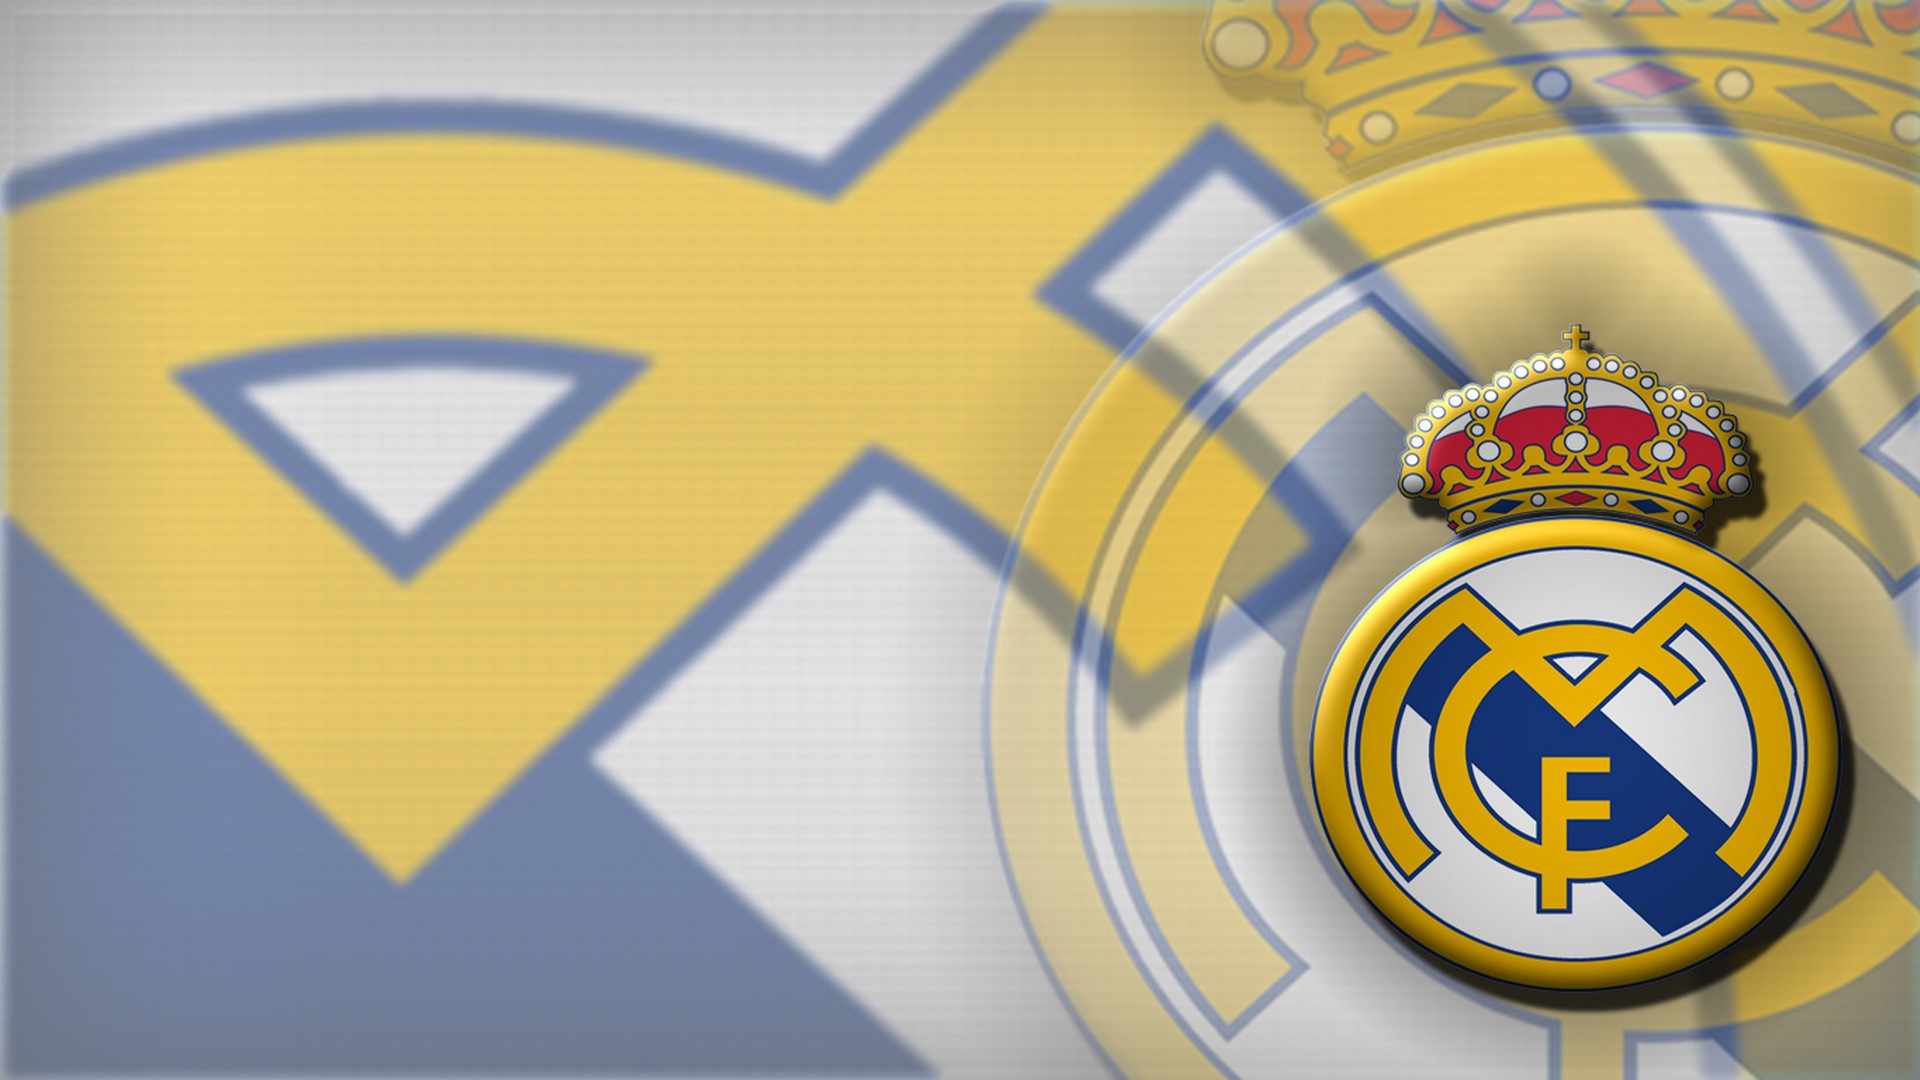 Real Madrid CF Wallpaper With Resolution 1920X1080 pixel. You can make this wallpaper for your Mac or Windows Desktop Background, iPhone, Android or Tablet and another Smartphone device for free